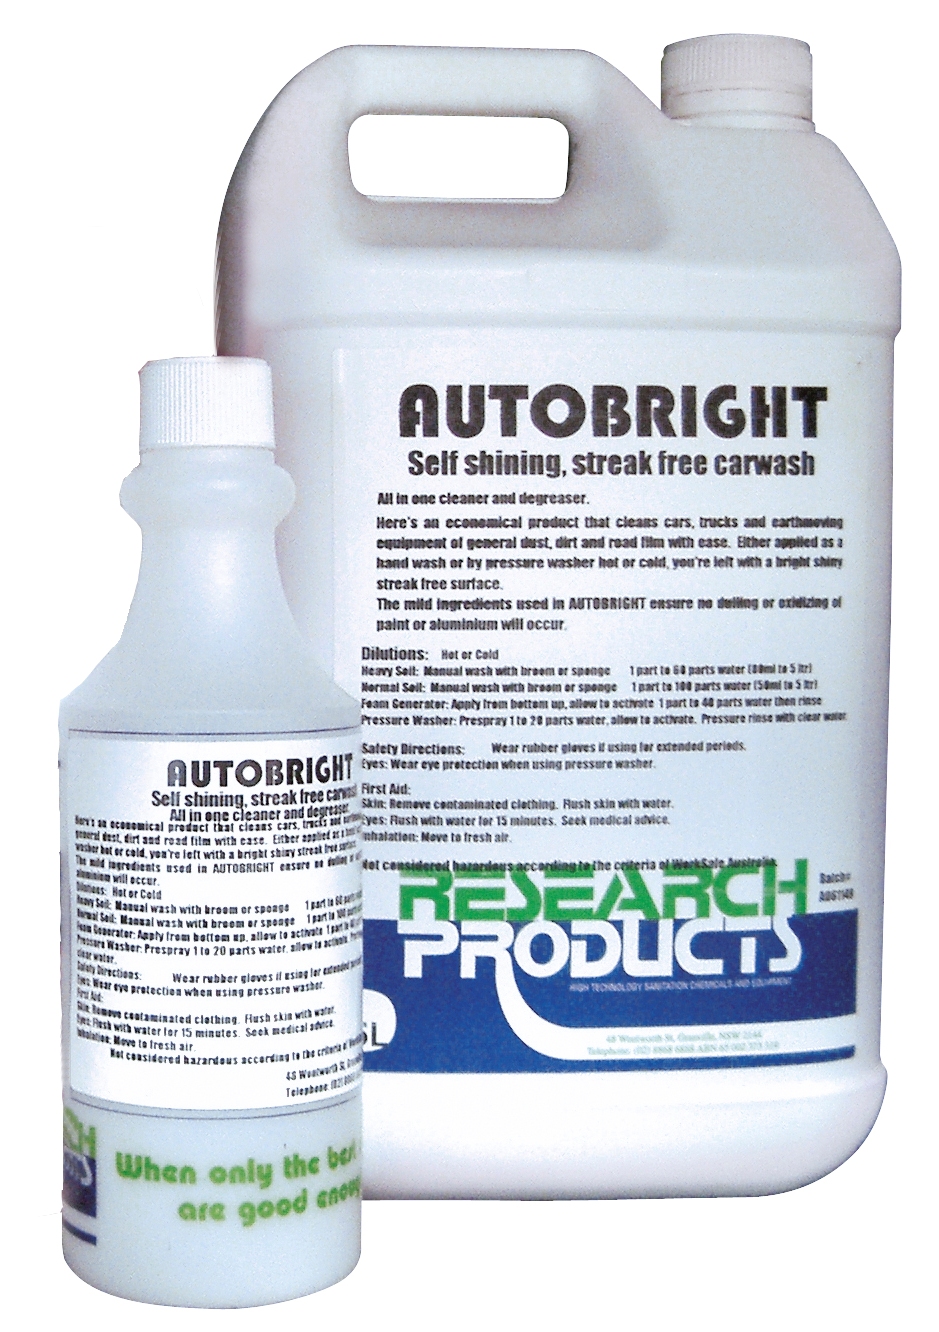 High performance car cleaning product that produces a